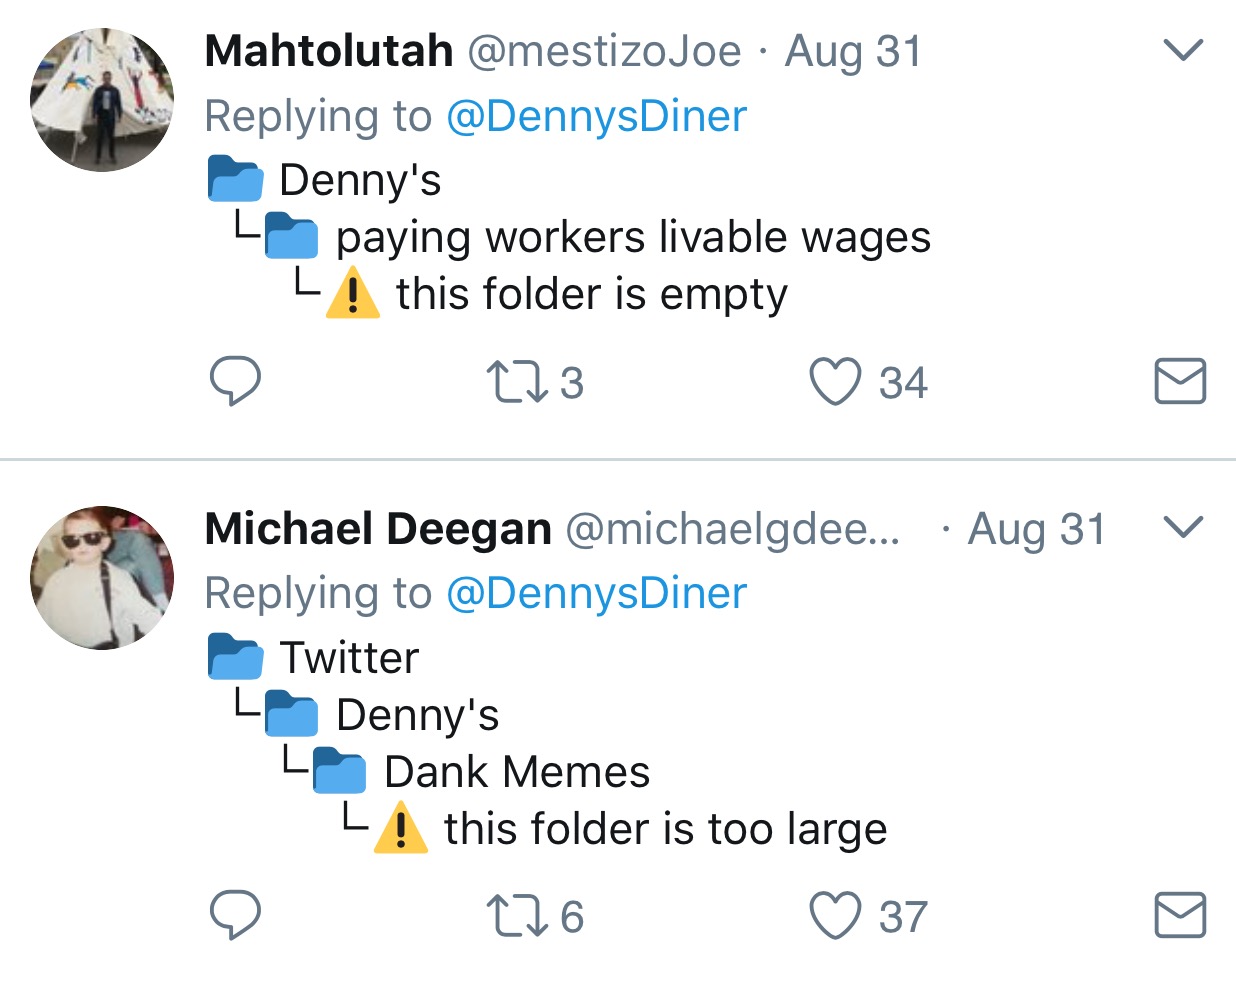 Funny tweets knocking Dennys for not paying proper wages, and having bad memes.